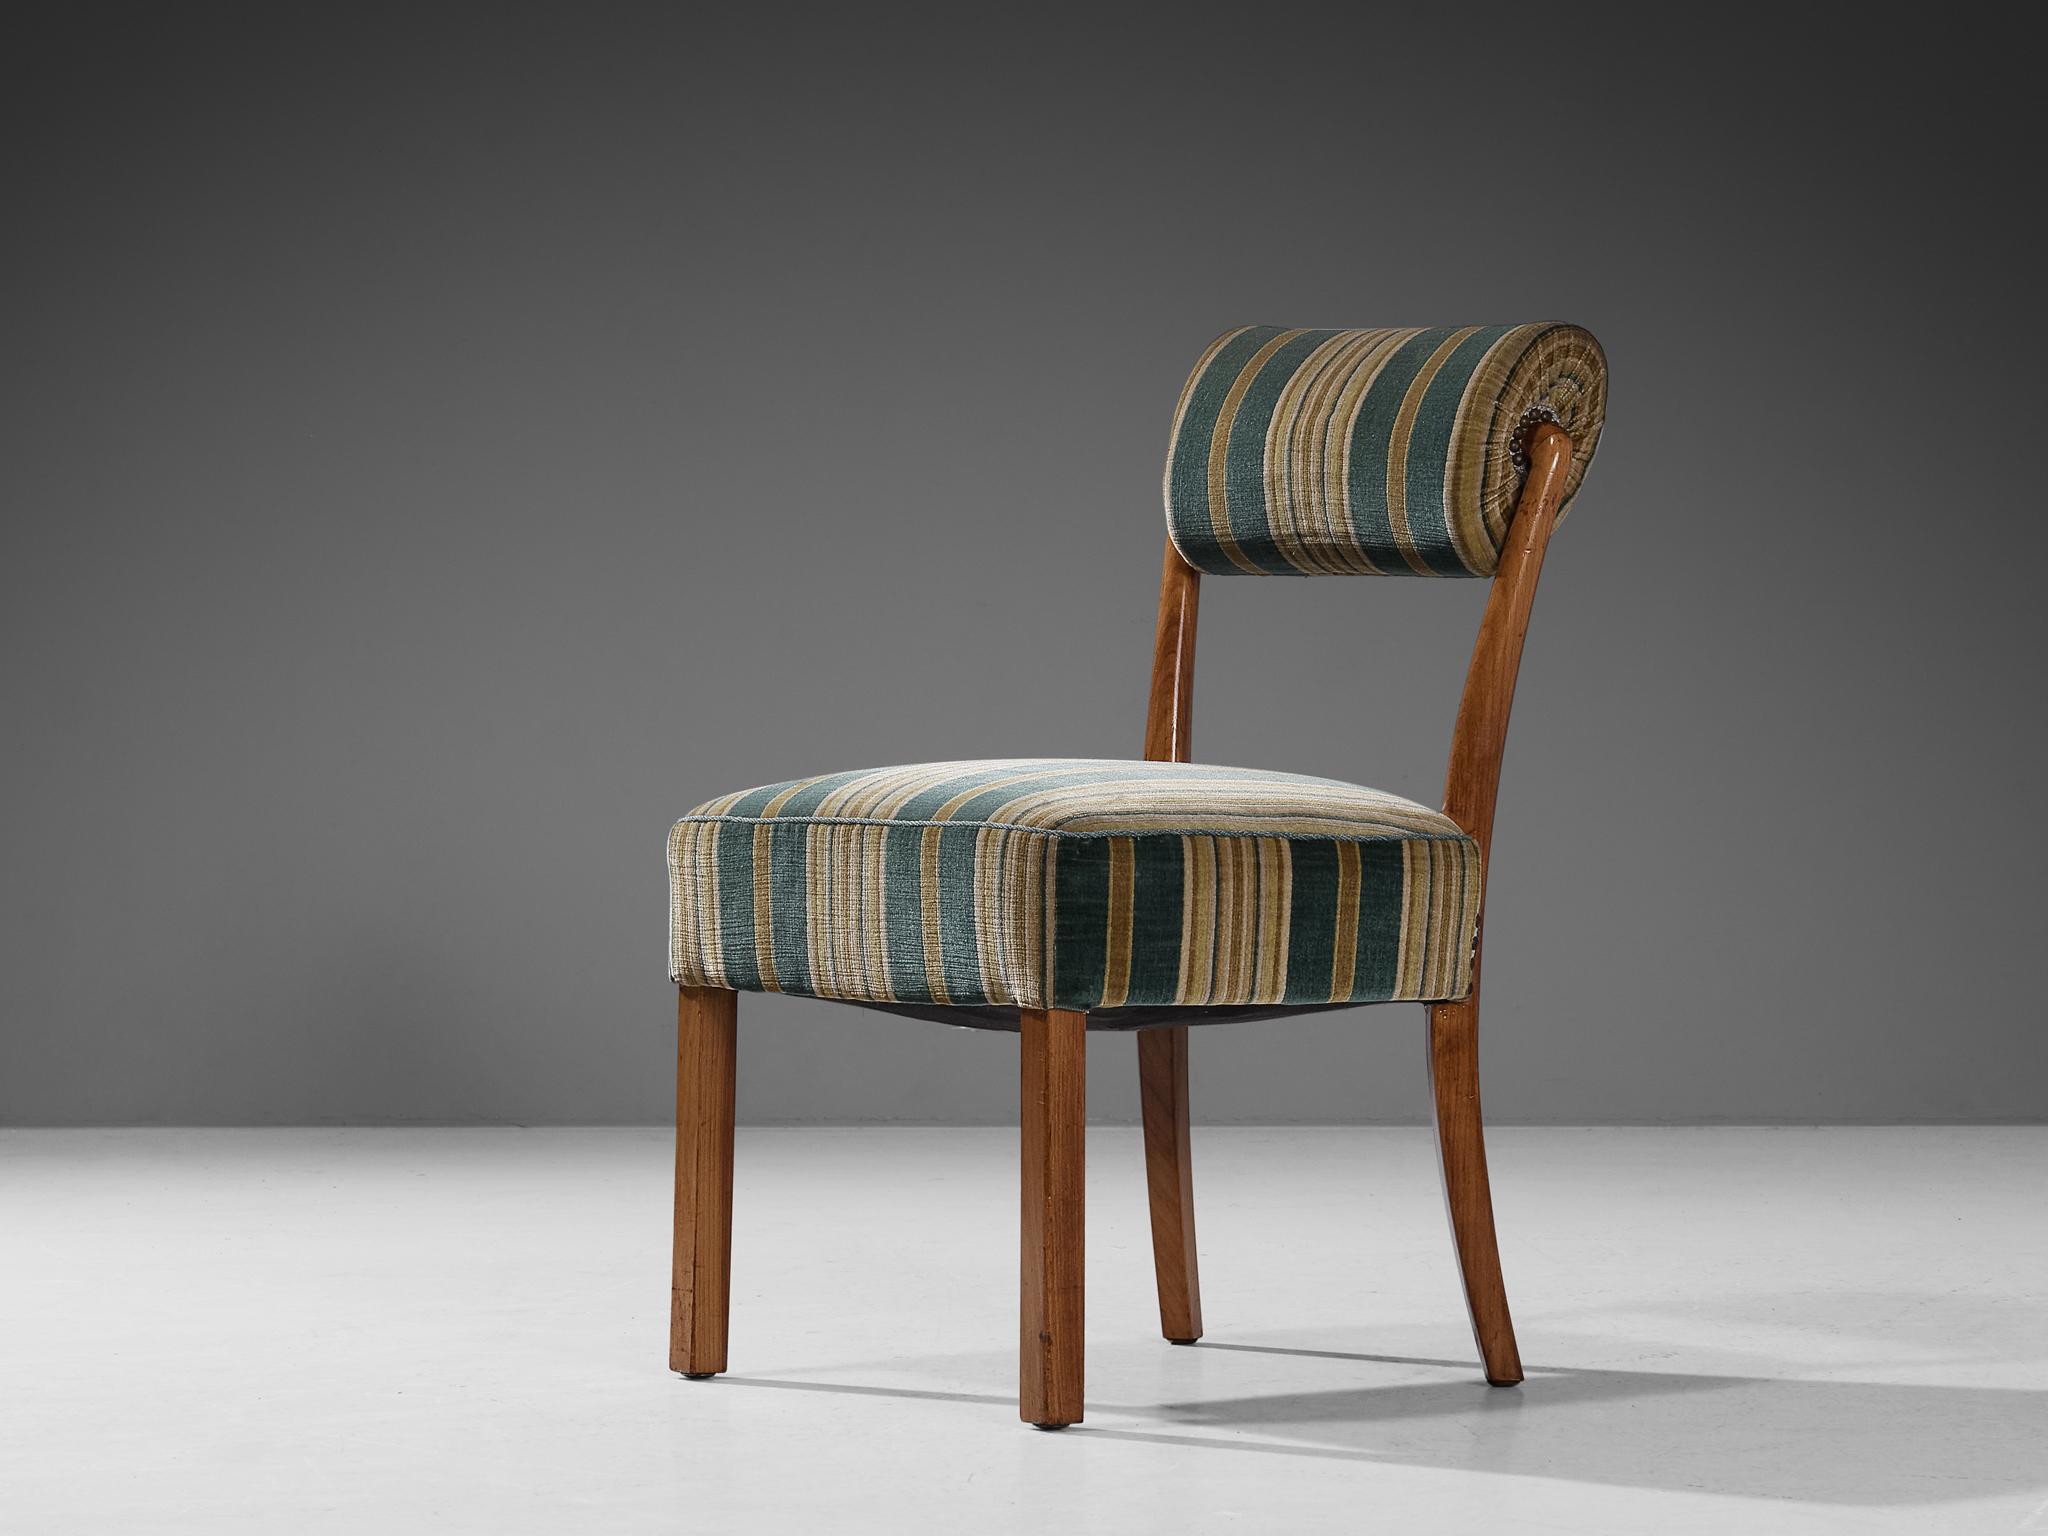 Side chair, walnut, fabric, metal, Italy, 1950s 

This charming side chair shows resemblances with the designs of Carlo de Carli (1910-1999). This chair proves the designer's great eye for proportions and material use. The rear legs are slightly